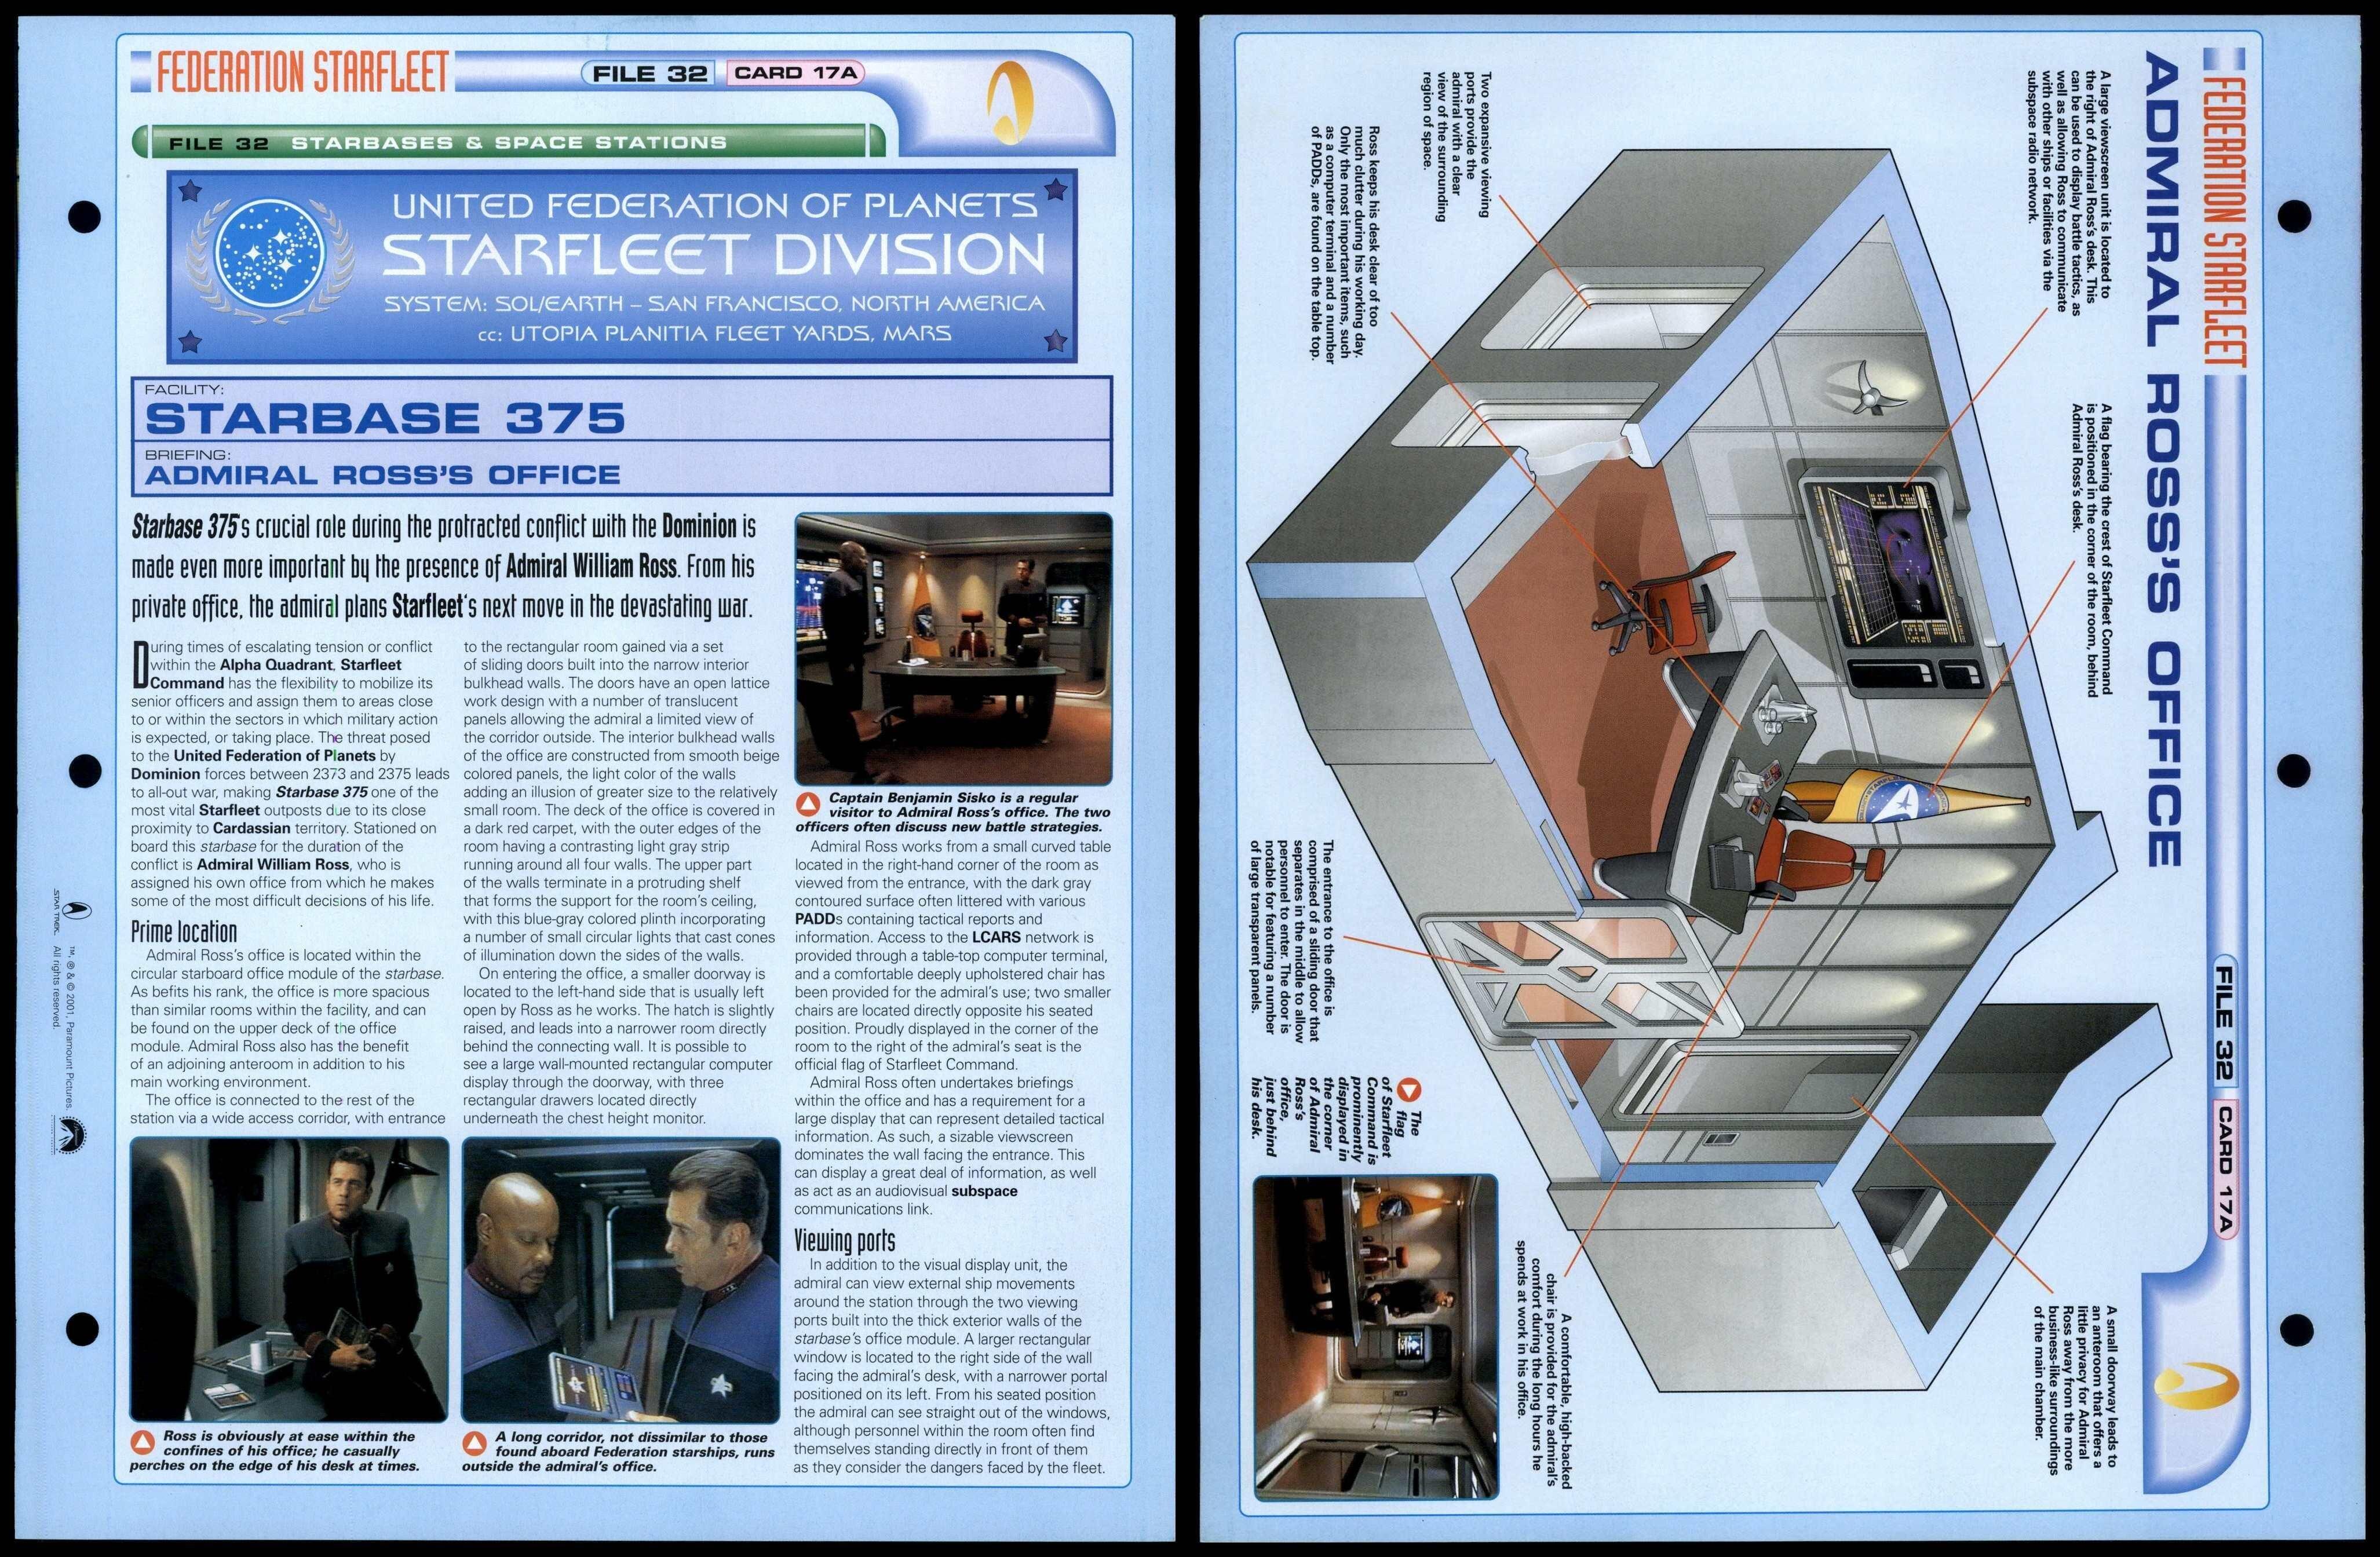 Starbase 375 Admiral Ross's Office - Starbases & Space Stations - Star Trek  Fact File Page